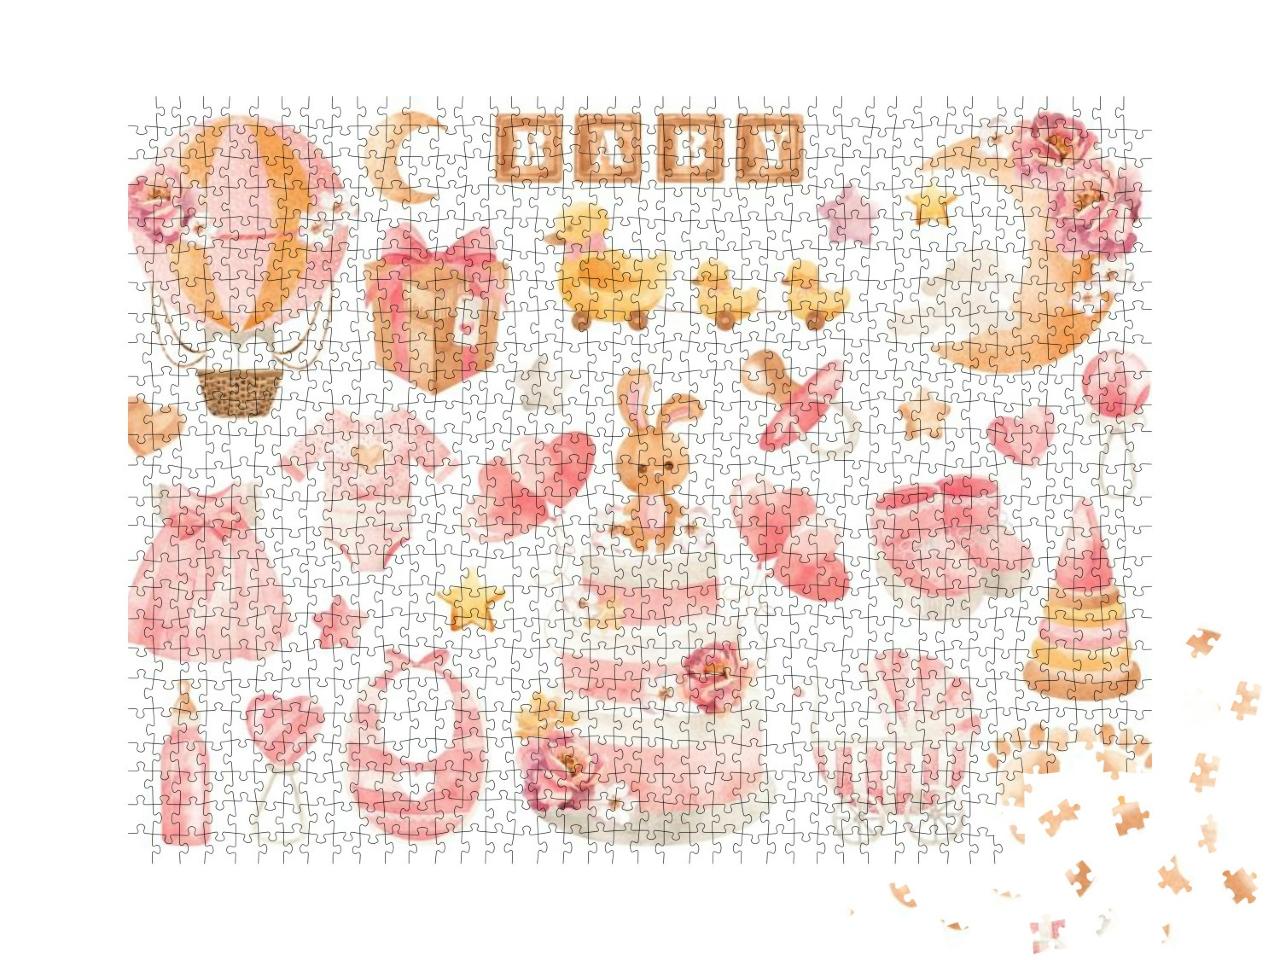 Set of Watercolor Elements for a Little Girl... Jigsaw Puzzle with 1000 pieces